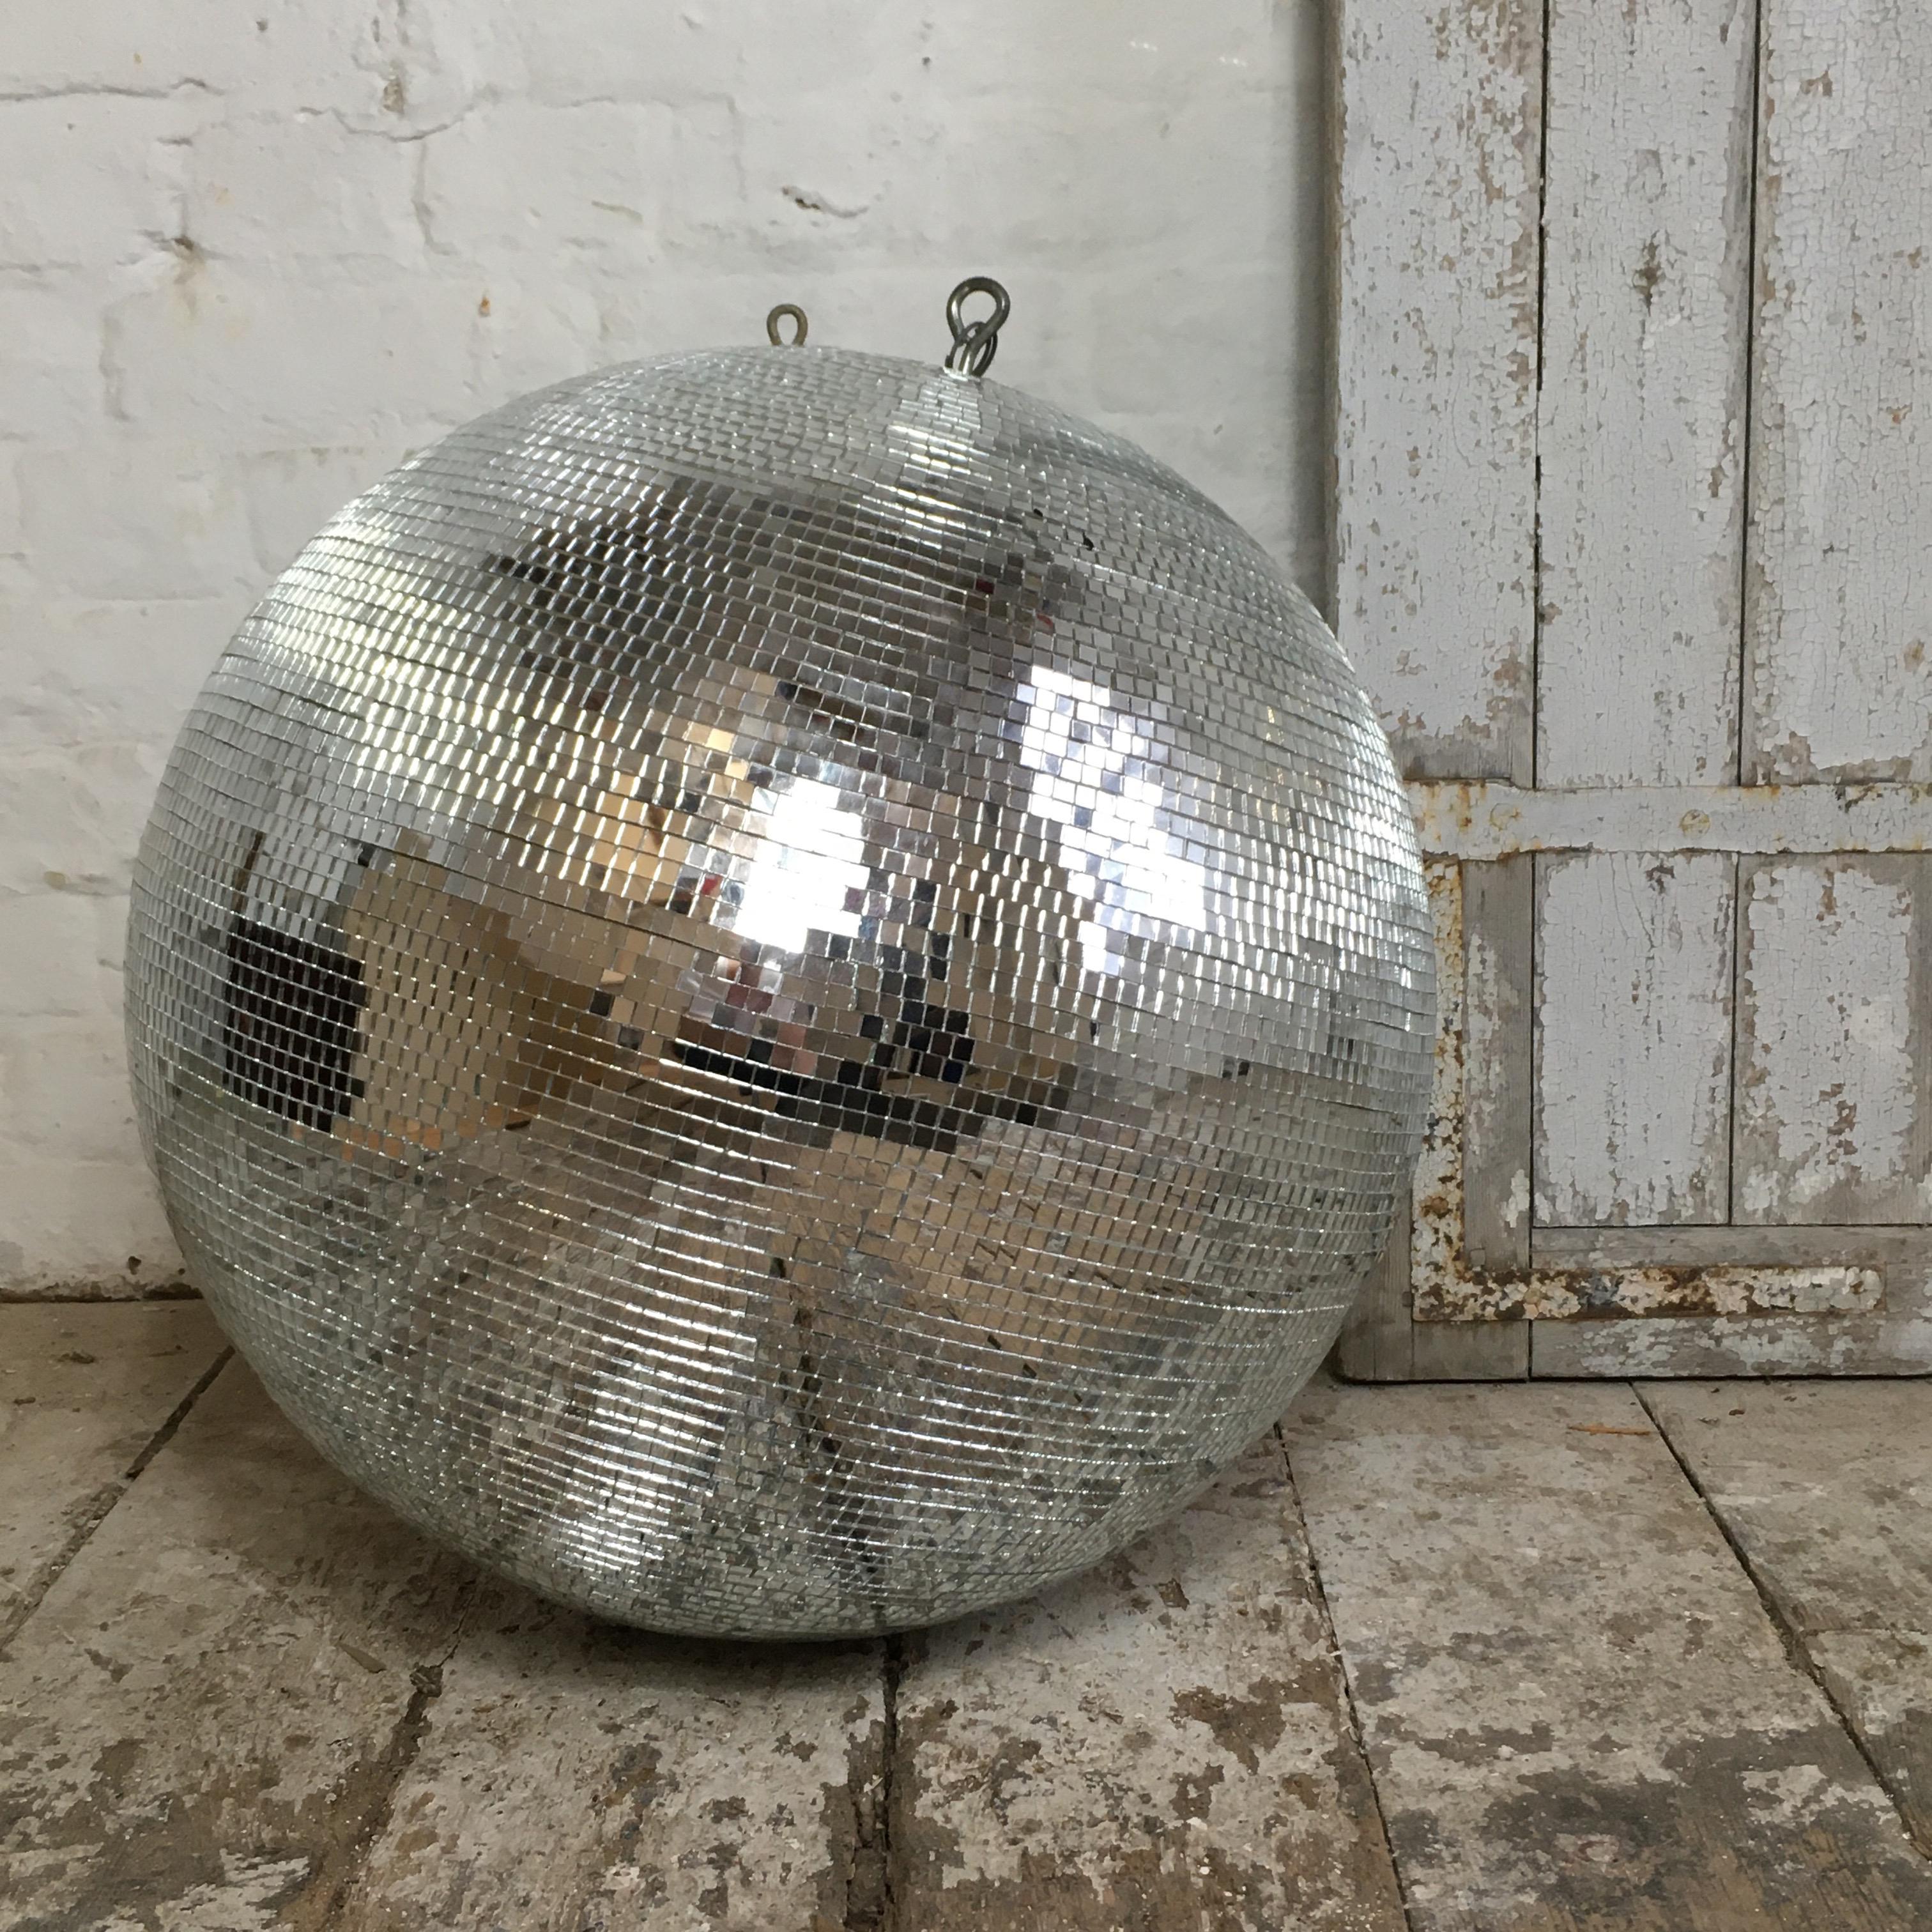 Large size vintage mirror ball, circa 1970s-1980s. 50cm diameter, 100cm circumference. Heavy duty chain approx 70cm length included. Small sized mirror squares, 7mm. The mirror ball has its motor and chain and is full working spinning order, motor